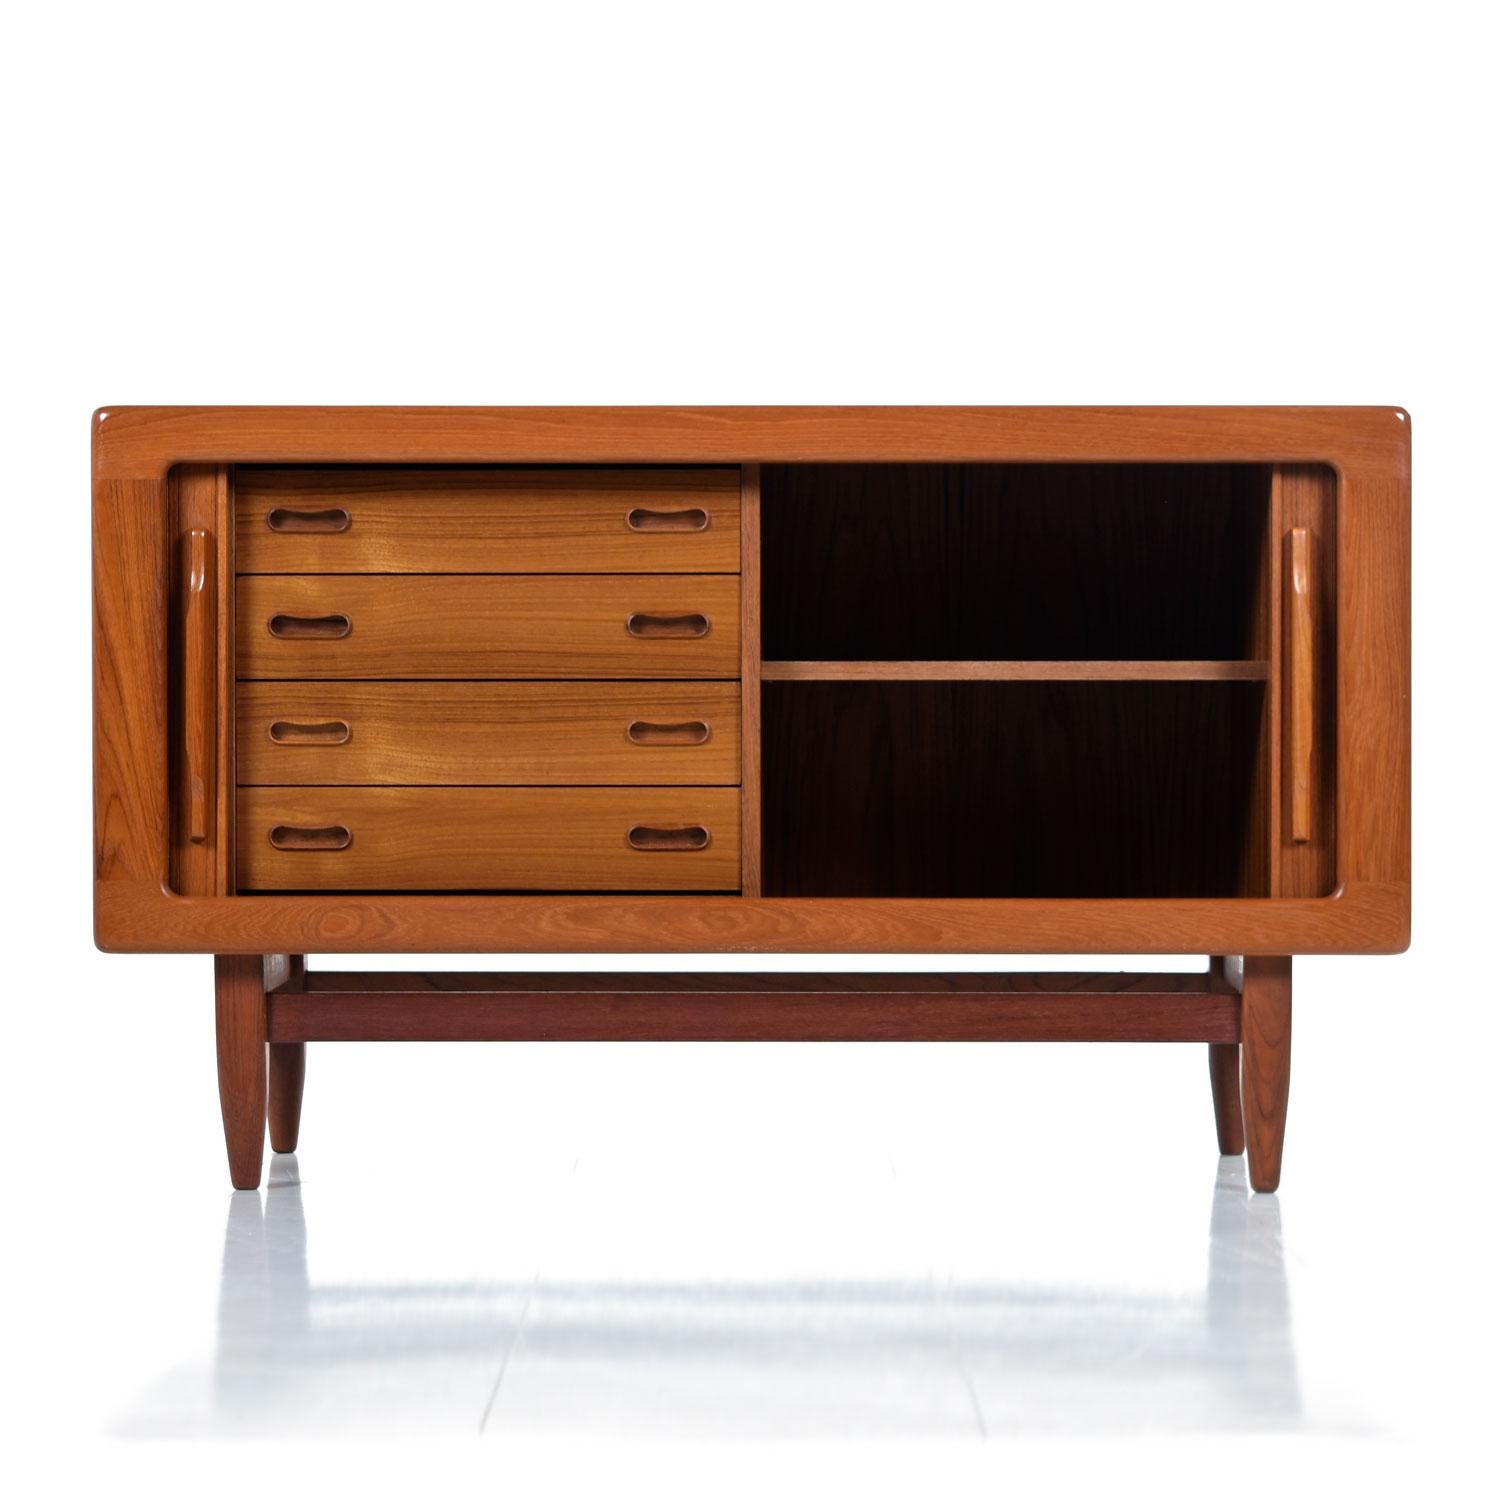 Vintage midcentury Scandinavian Modern Danish teak tambour door credenza. Ideal as a media cabinet / TV stand and deep enough to accommodate 12? LP’s. Expertly crafted with sleek lip-like, solid teak carved handles gracing the tambour doors. Open